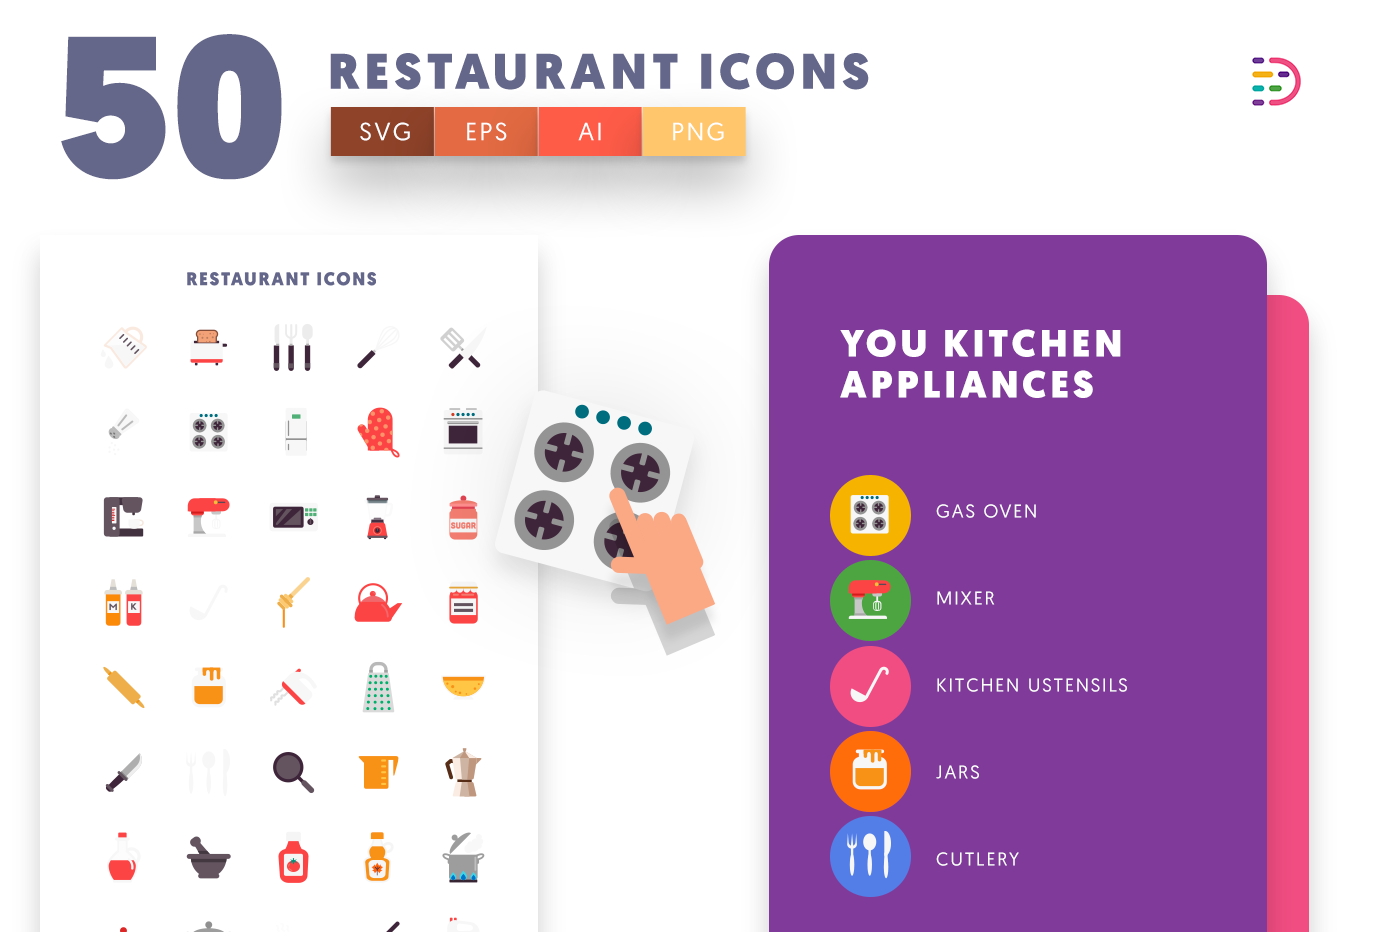 Compatible Restaurant Icons with colored backgrounds